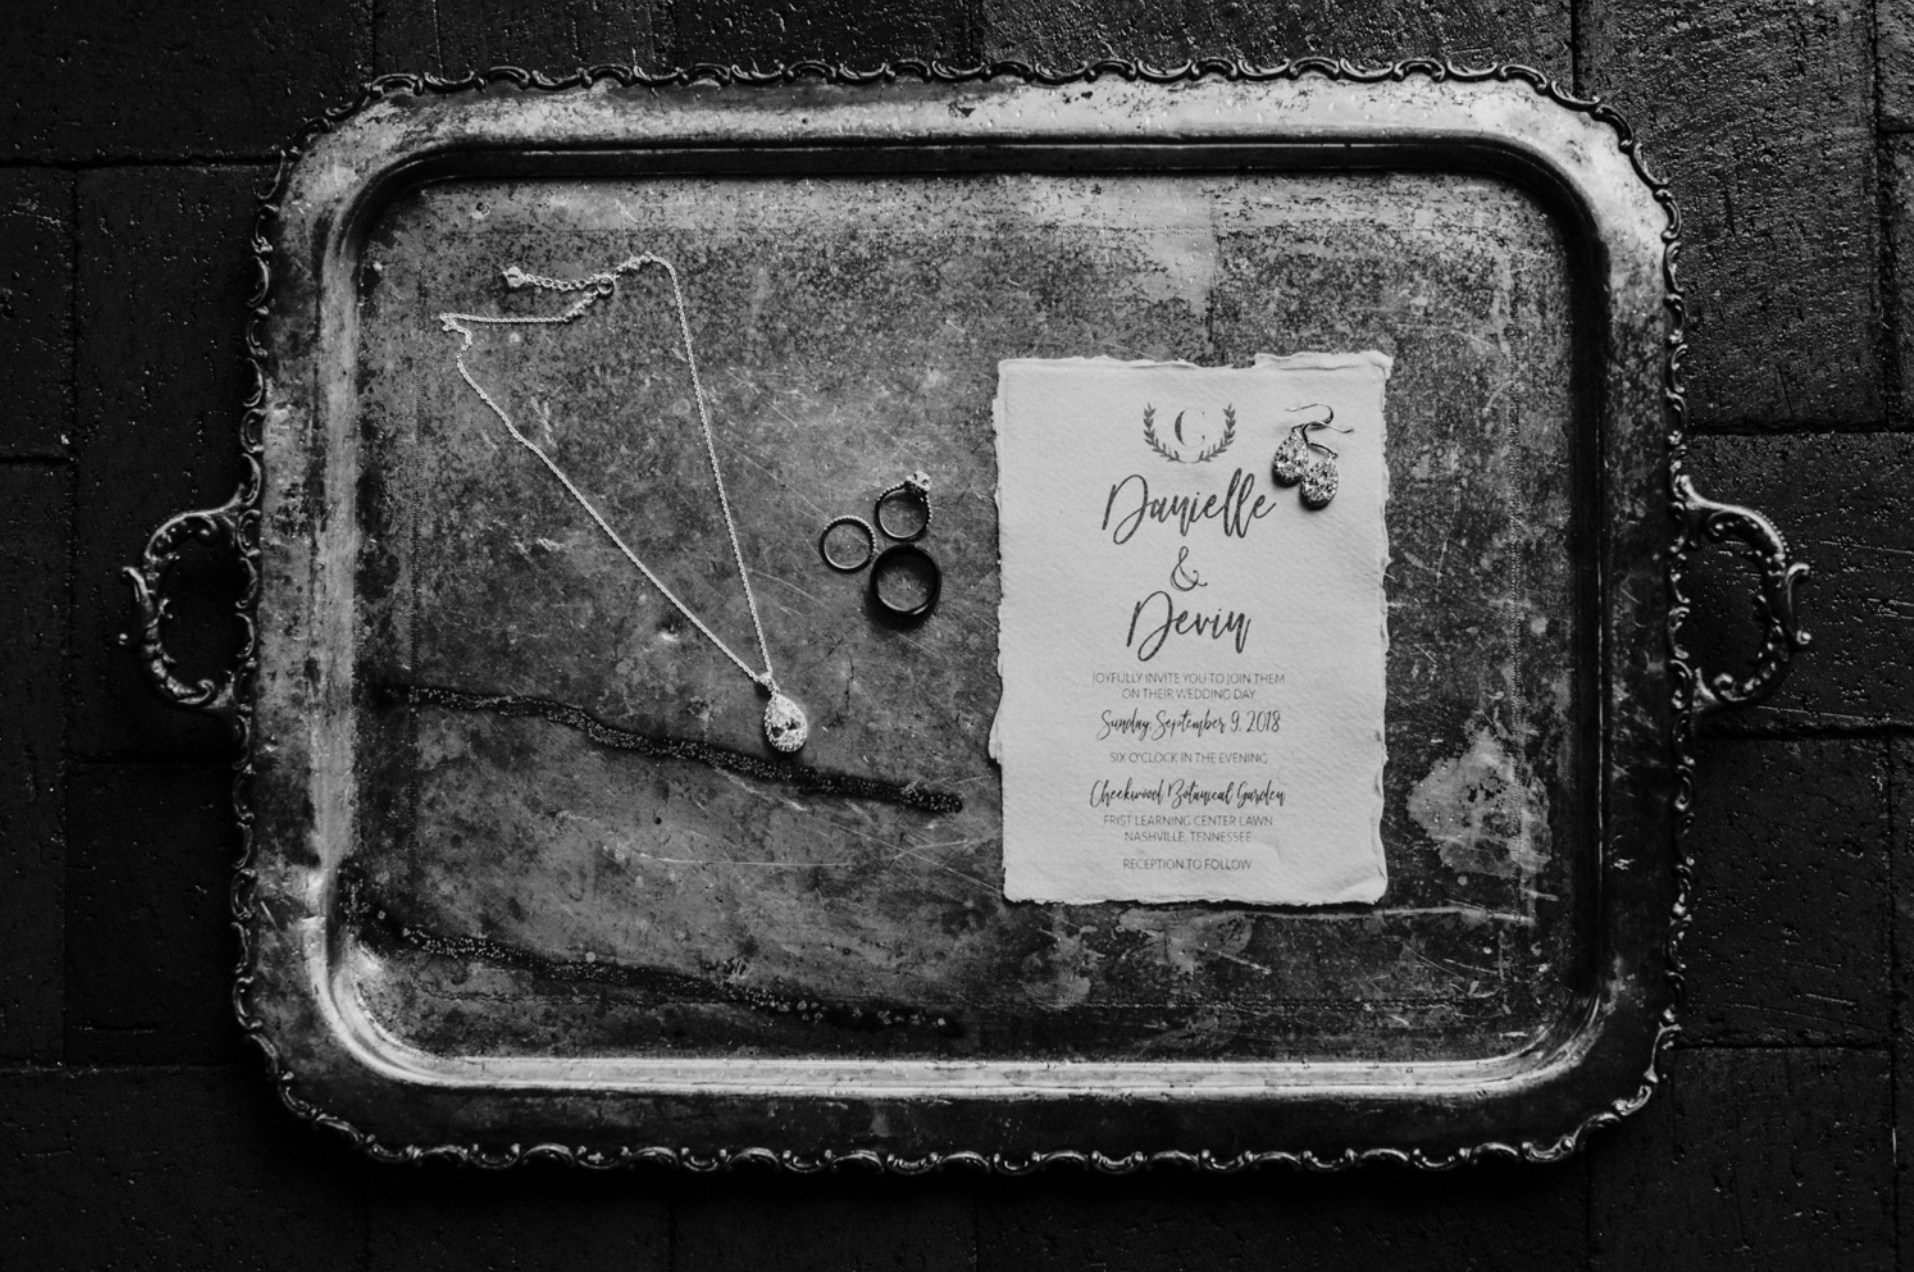 The bride's necklace and wedding ring, invitation and jewelry lay on a decorative tray at their Cheekwood Botanical Wedding.